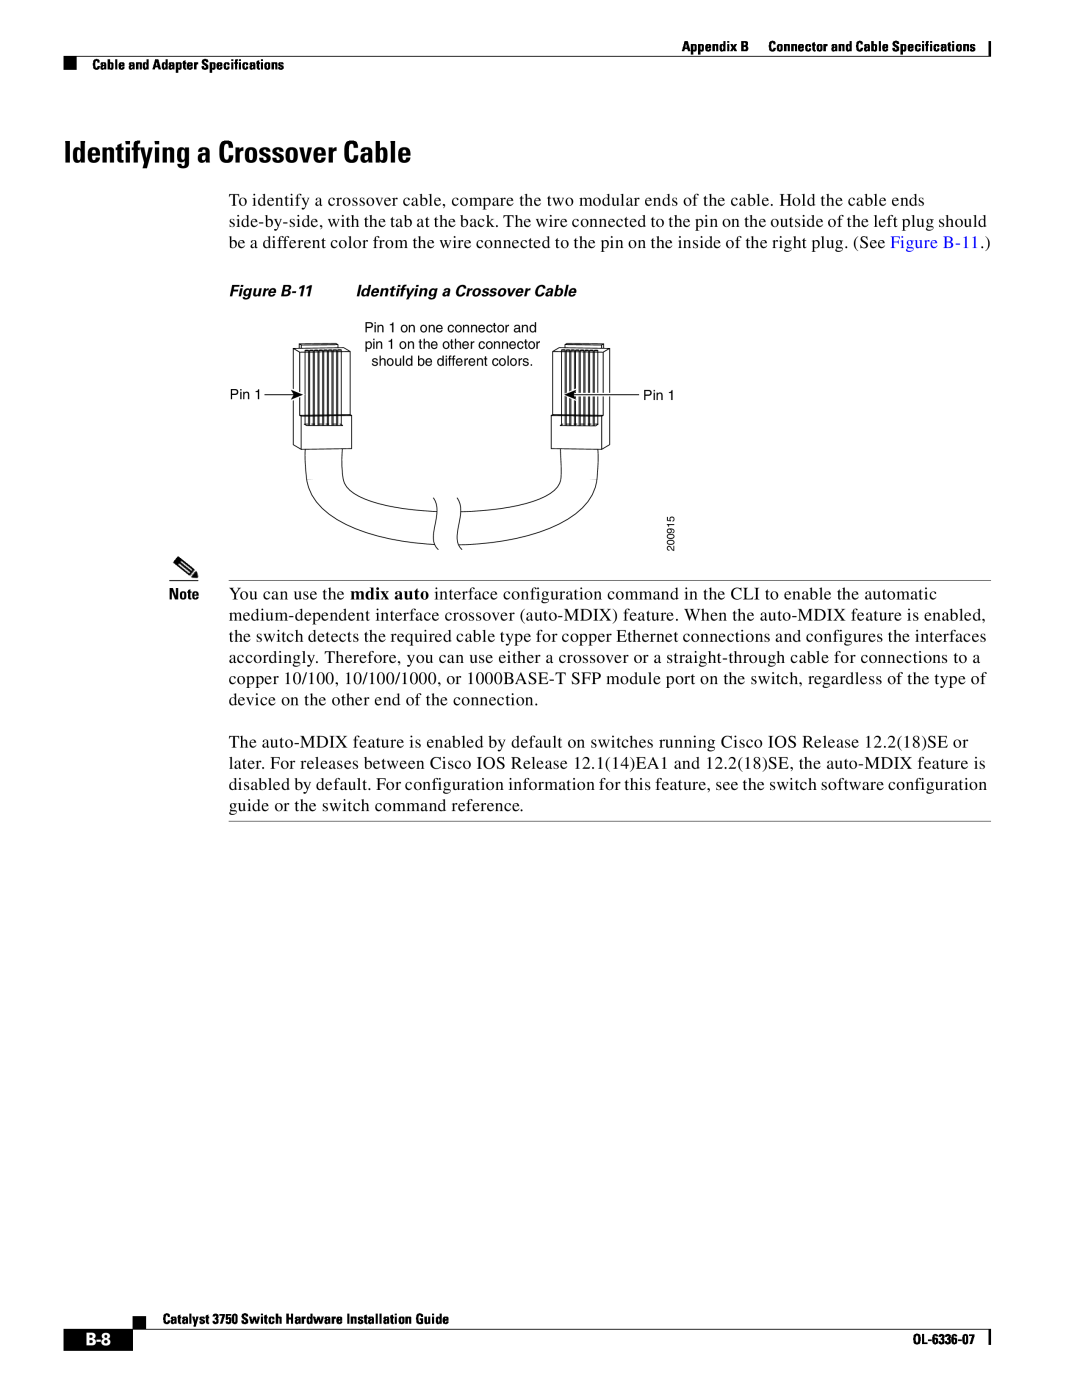 Cisco Systems WSC3750X24TS specifications Identifying a Crossover Cable 